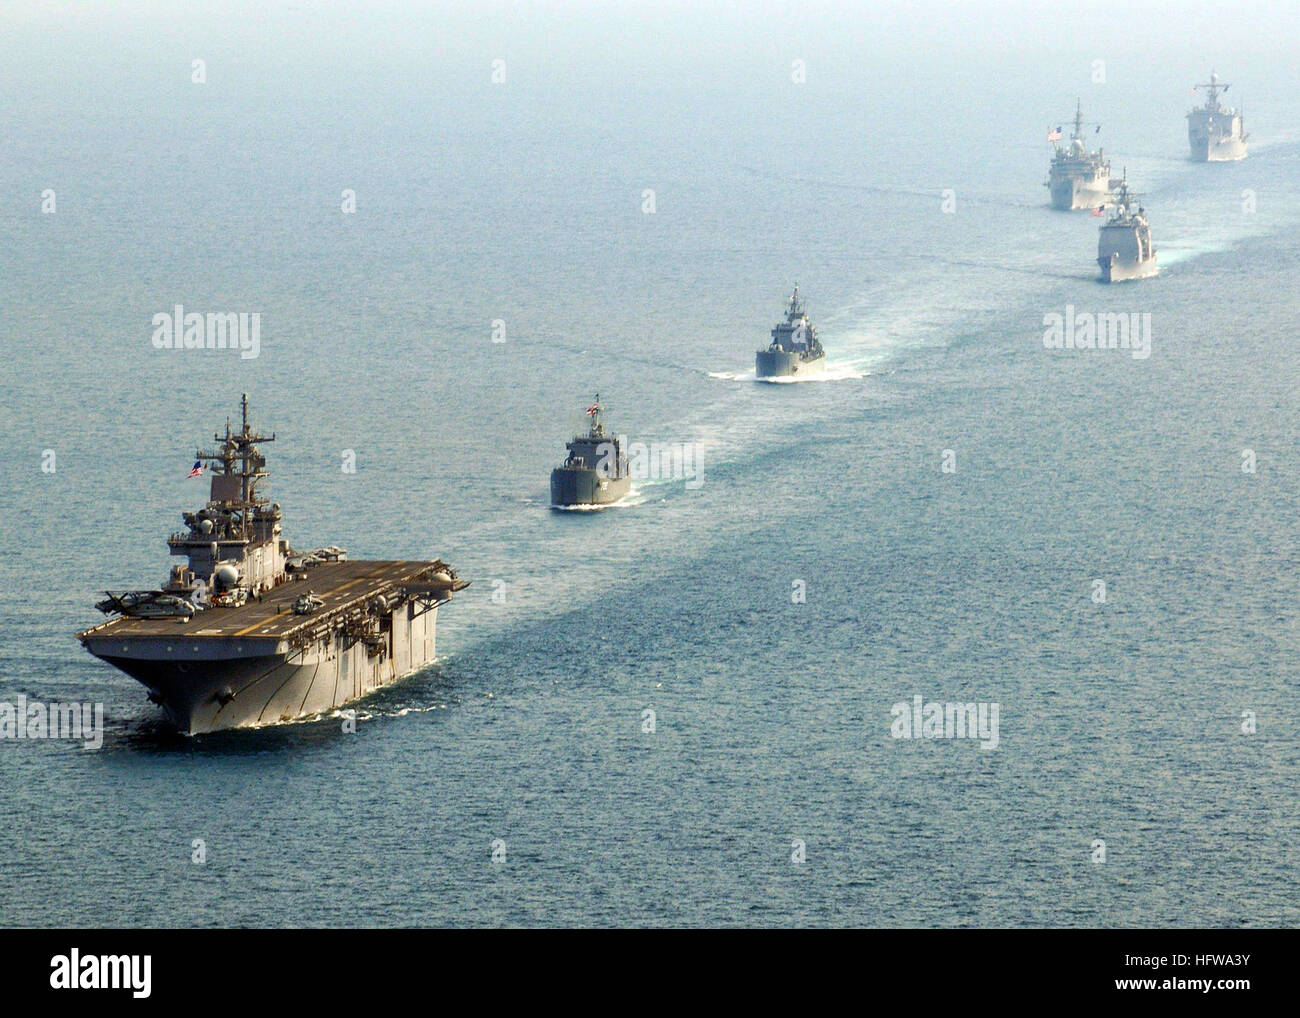 100208-N-9418A-520 GULF OF THAILAND (Feb. 8, 2010) The forward-deployed amphibious assault ship USS Essex (LHD 2), the Royal Thai navy medium landing ship HTMS Surin (LST 722), the Republic of Korea navy tank landing ship Seongin Bong (LST 685), the Ticonderoga-class guided-missile cruiser USS Shiloh (CG 67), the forward-deployed amphibious dock landing ship USS Harpers Ferry (LSD 49) and the forward-deployed amphibious transport dock ship USS Denver (LPD 9) transit in formation in the Gulf of Thailand during exercise Cobra Gold 2010. (U.S. Navy photo by Mass Communication Specialist 3rd Class Stock Photo